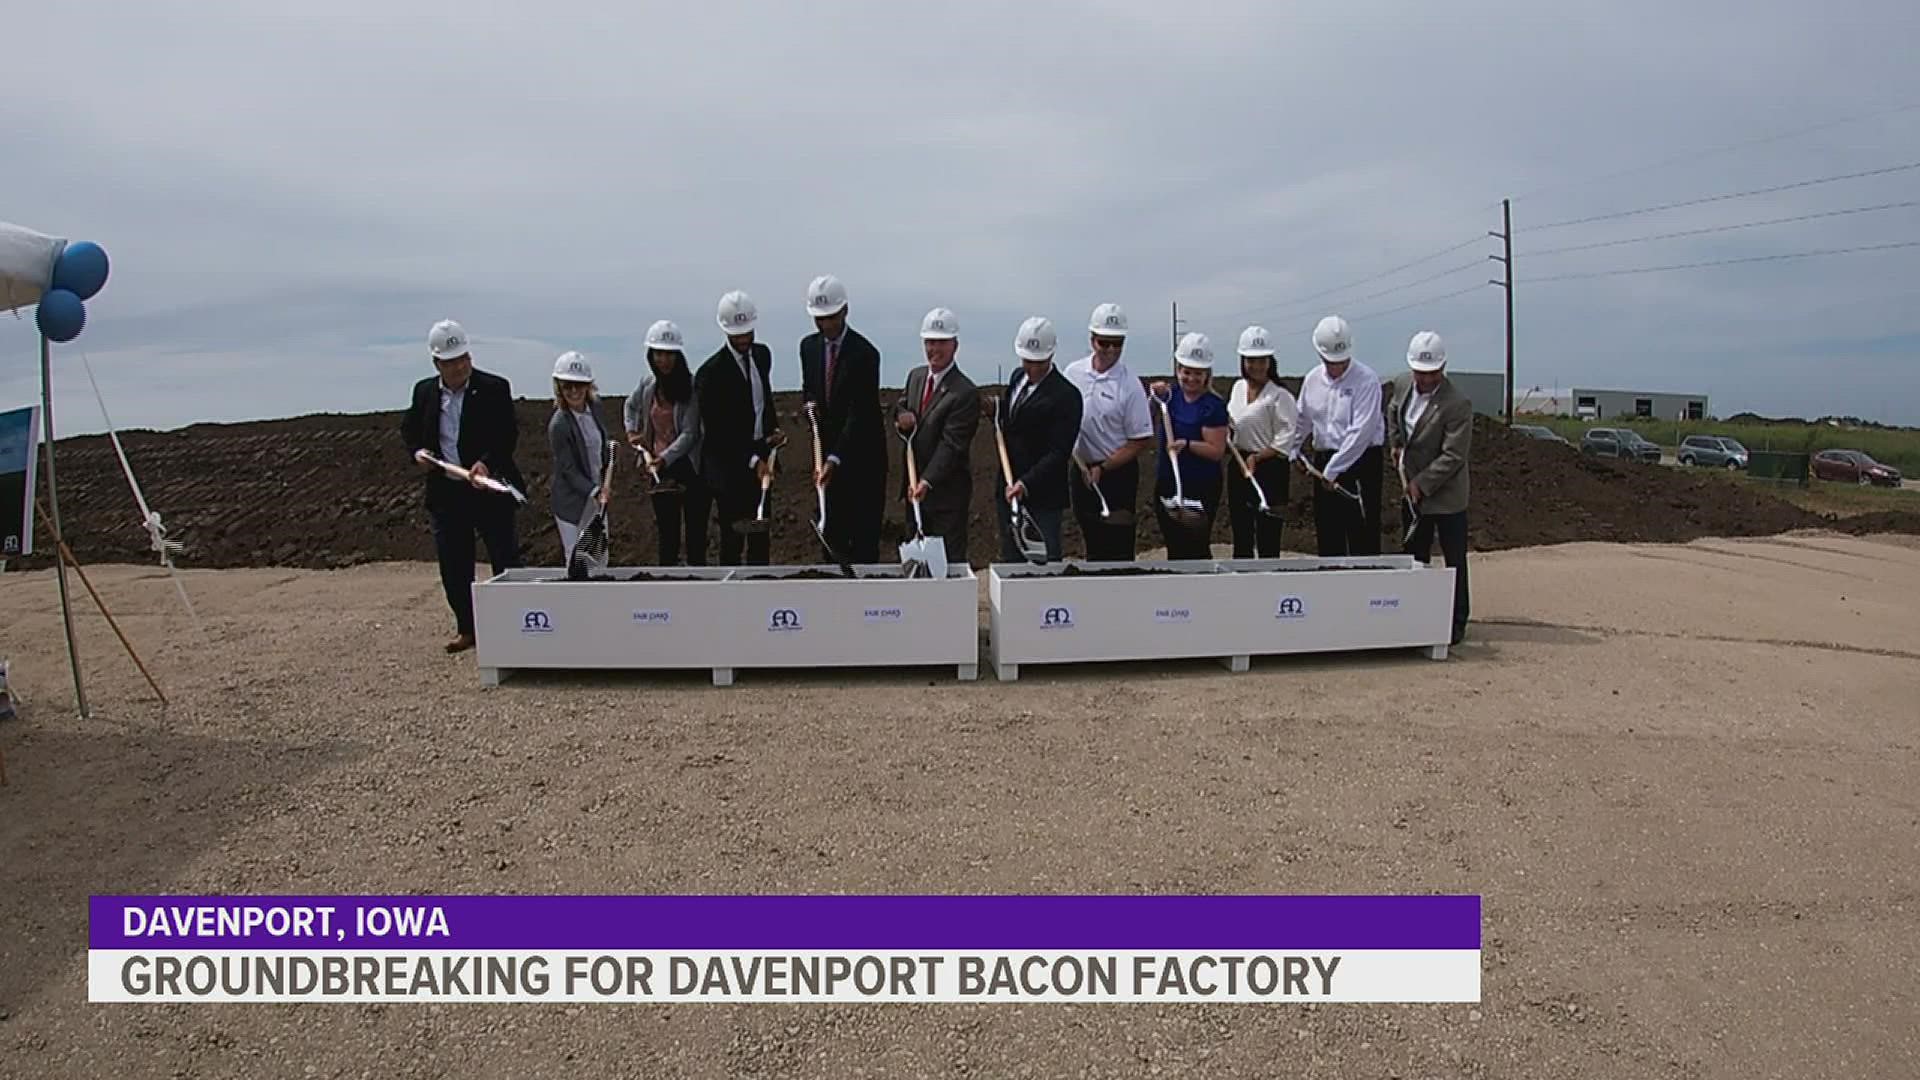 The 150-thousand-square-foot bacon factory is expected to bring around 250 jobs to the Quad Cities.